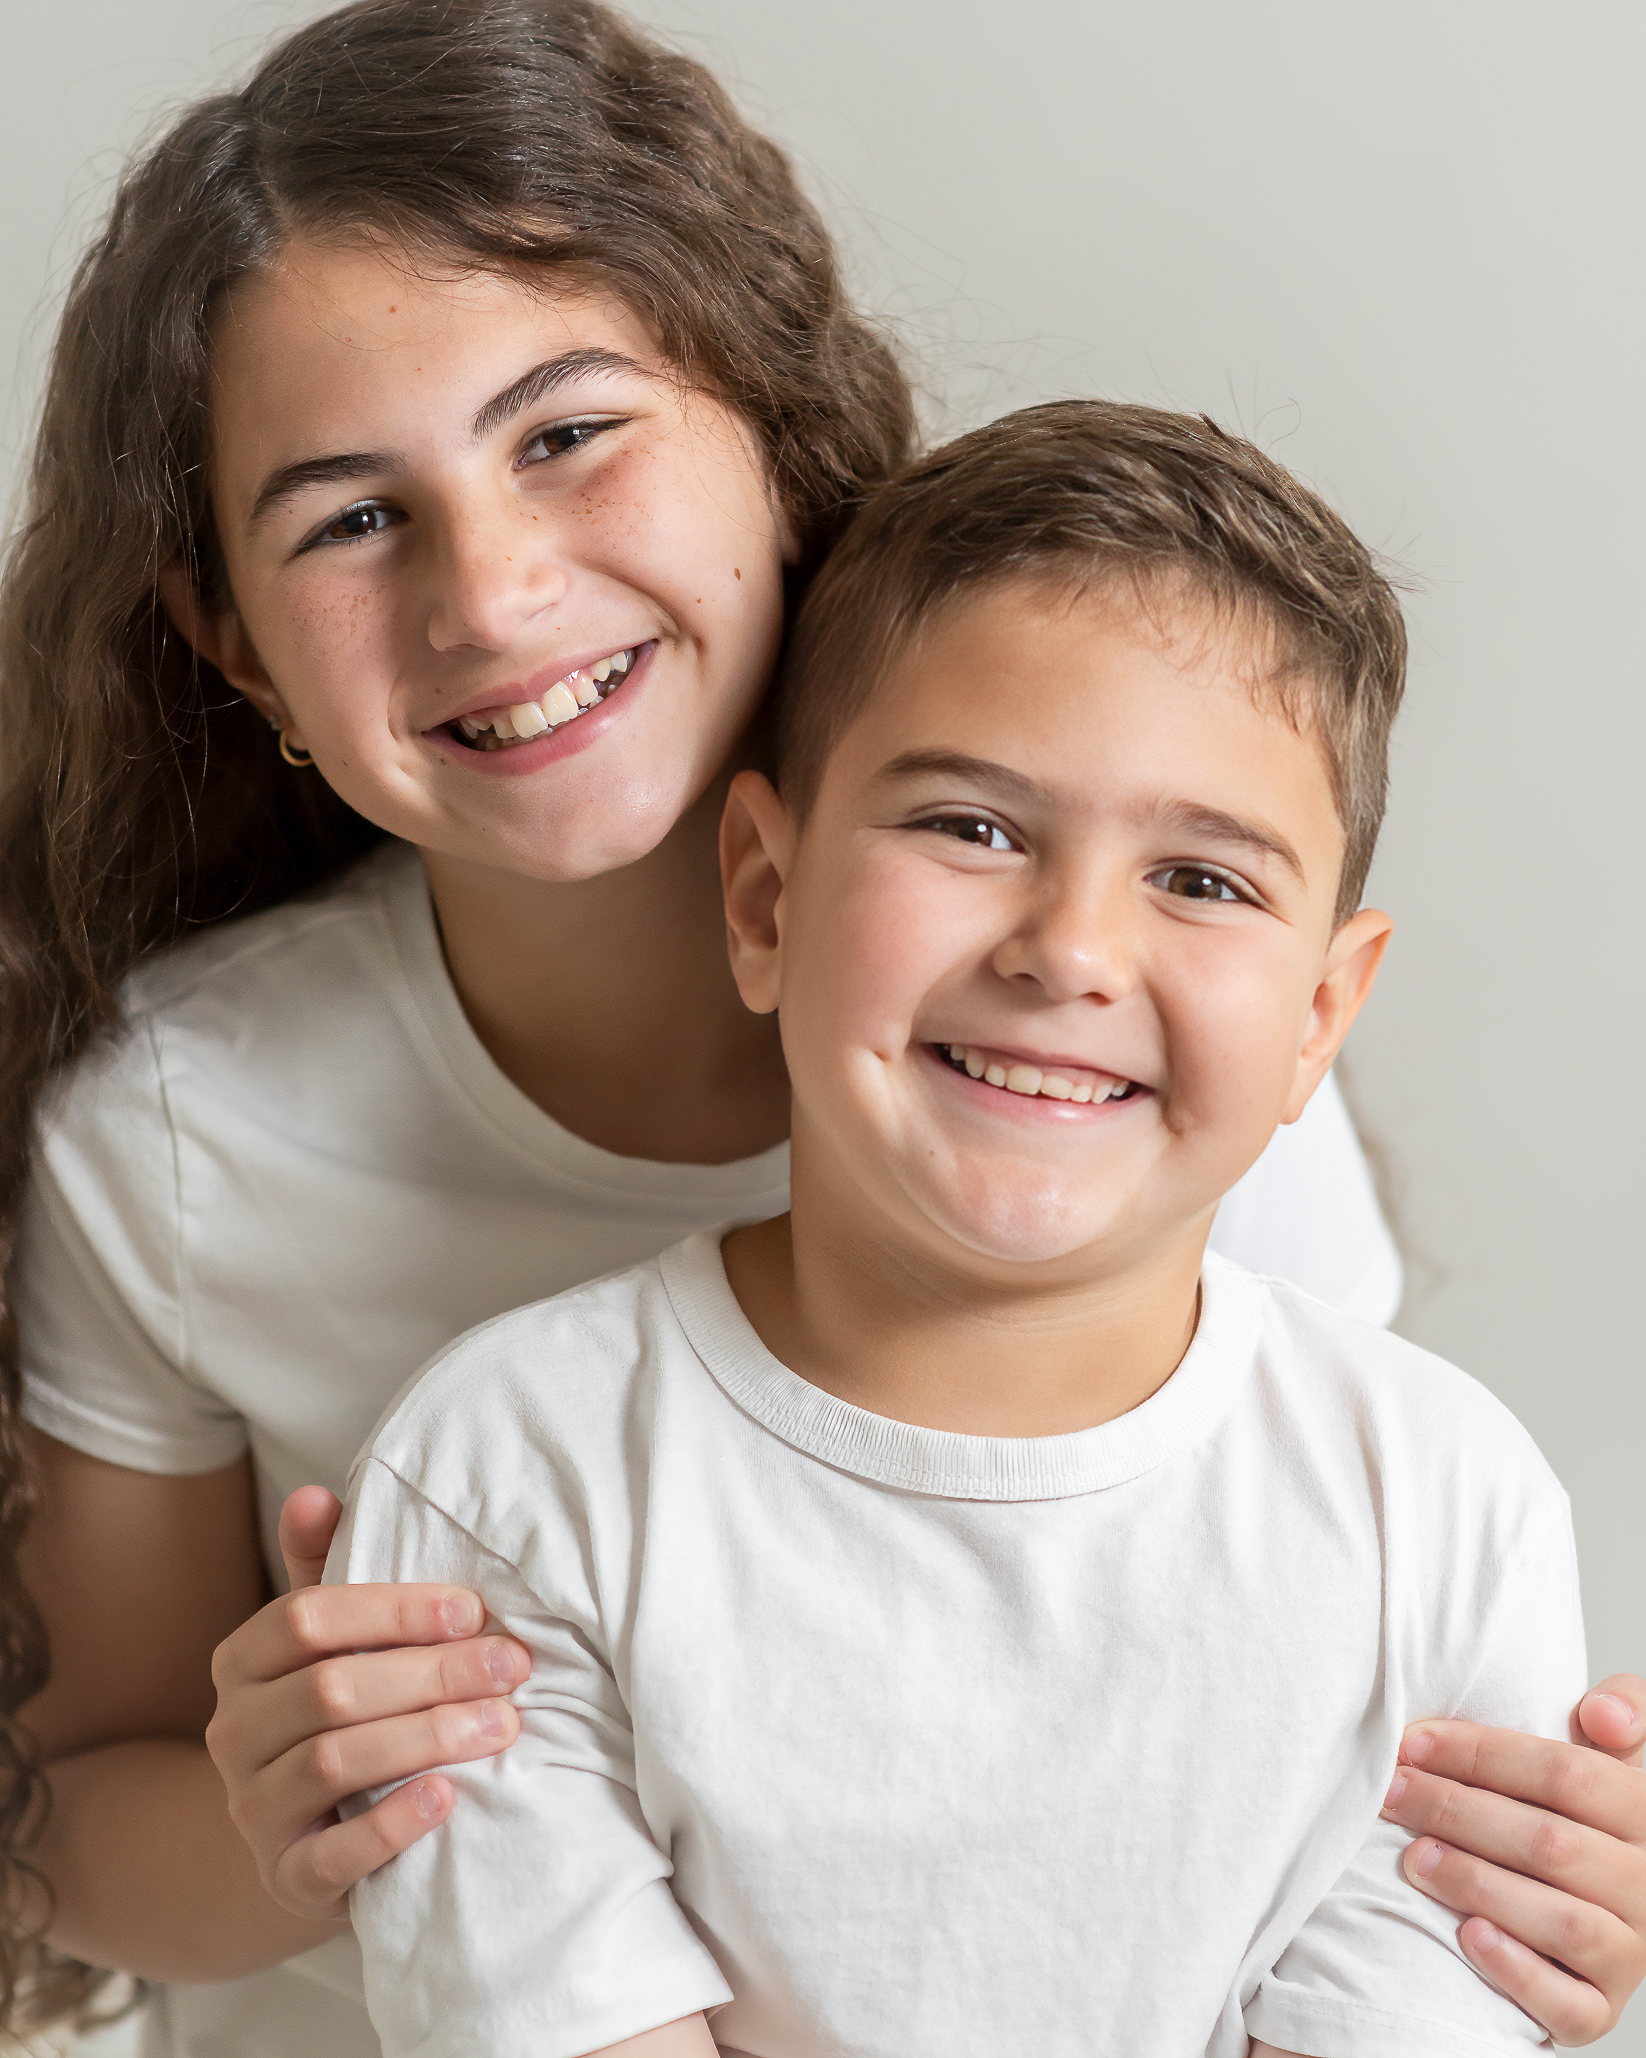 young siblings smiling showing their teeth in a childrens studio session